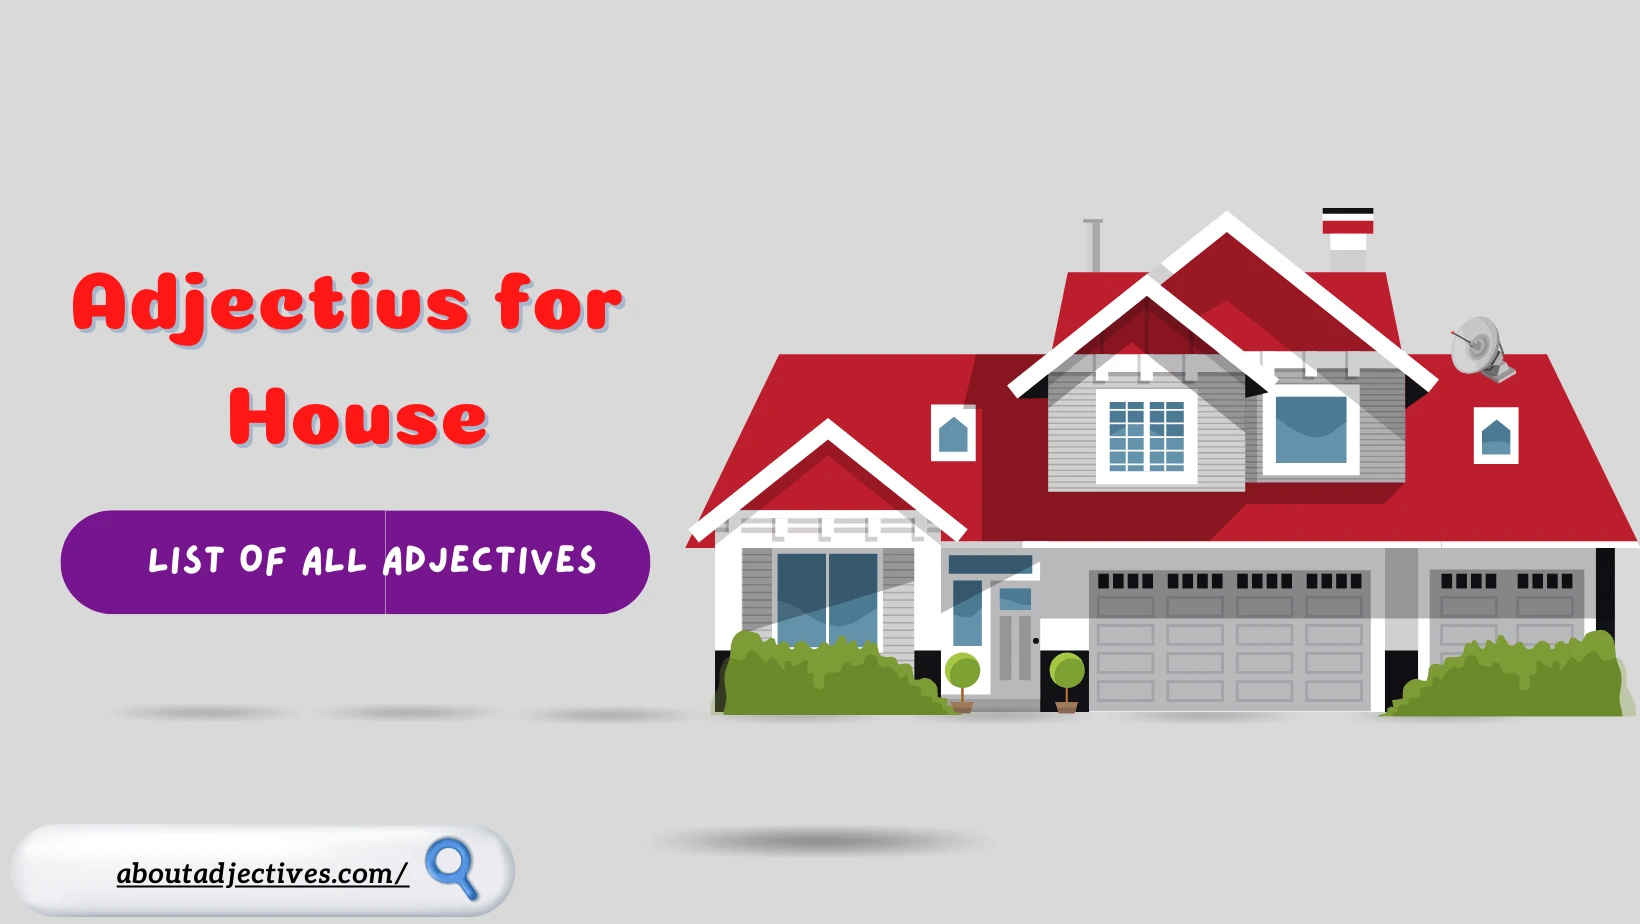 Adjectives for House